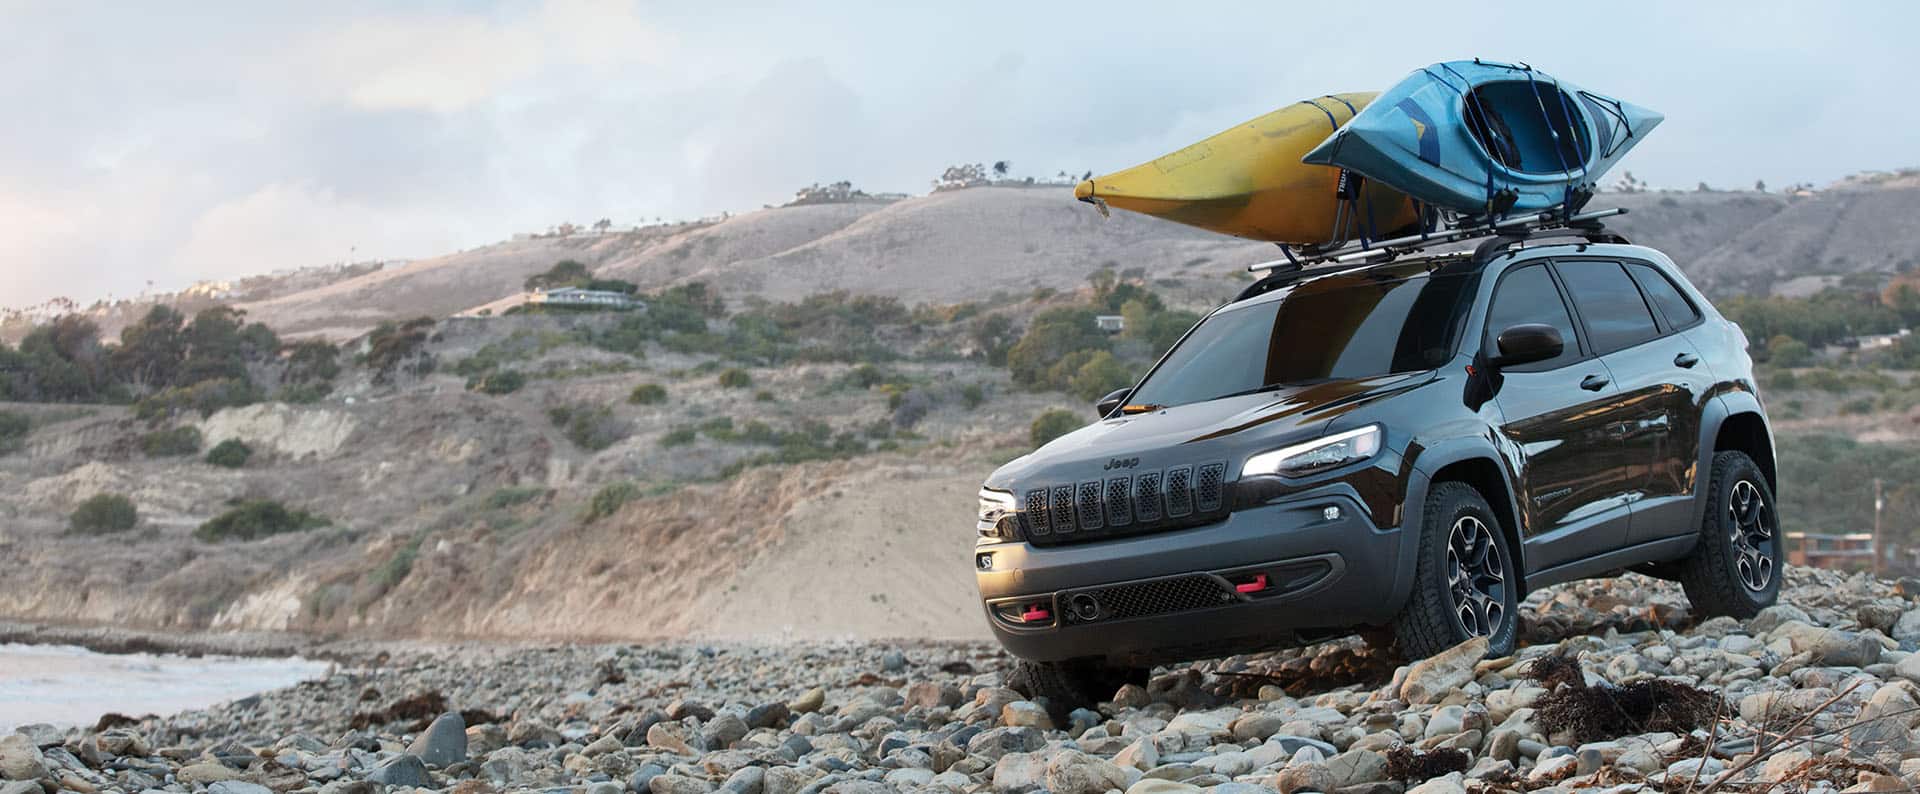 A 2023 Jeep Cherokee Trailhawk with two kayaks strapped to its roof rack, crawling over stones on a rocky beach.